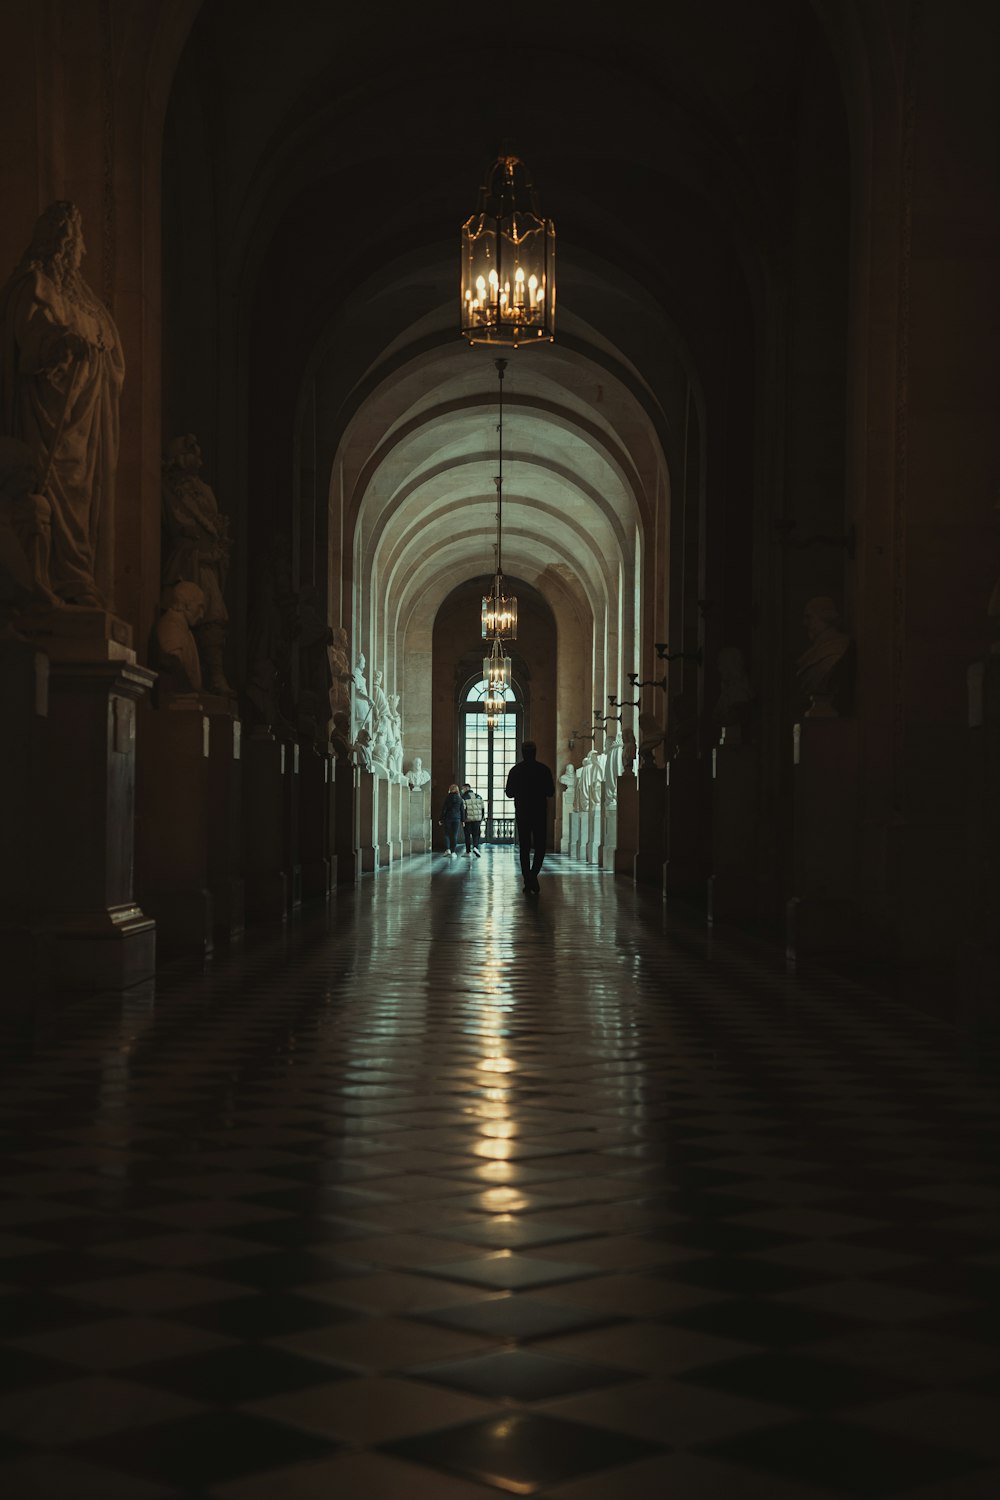 a hallway in a building with statues and a lamp